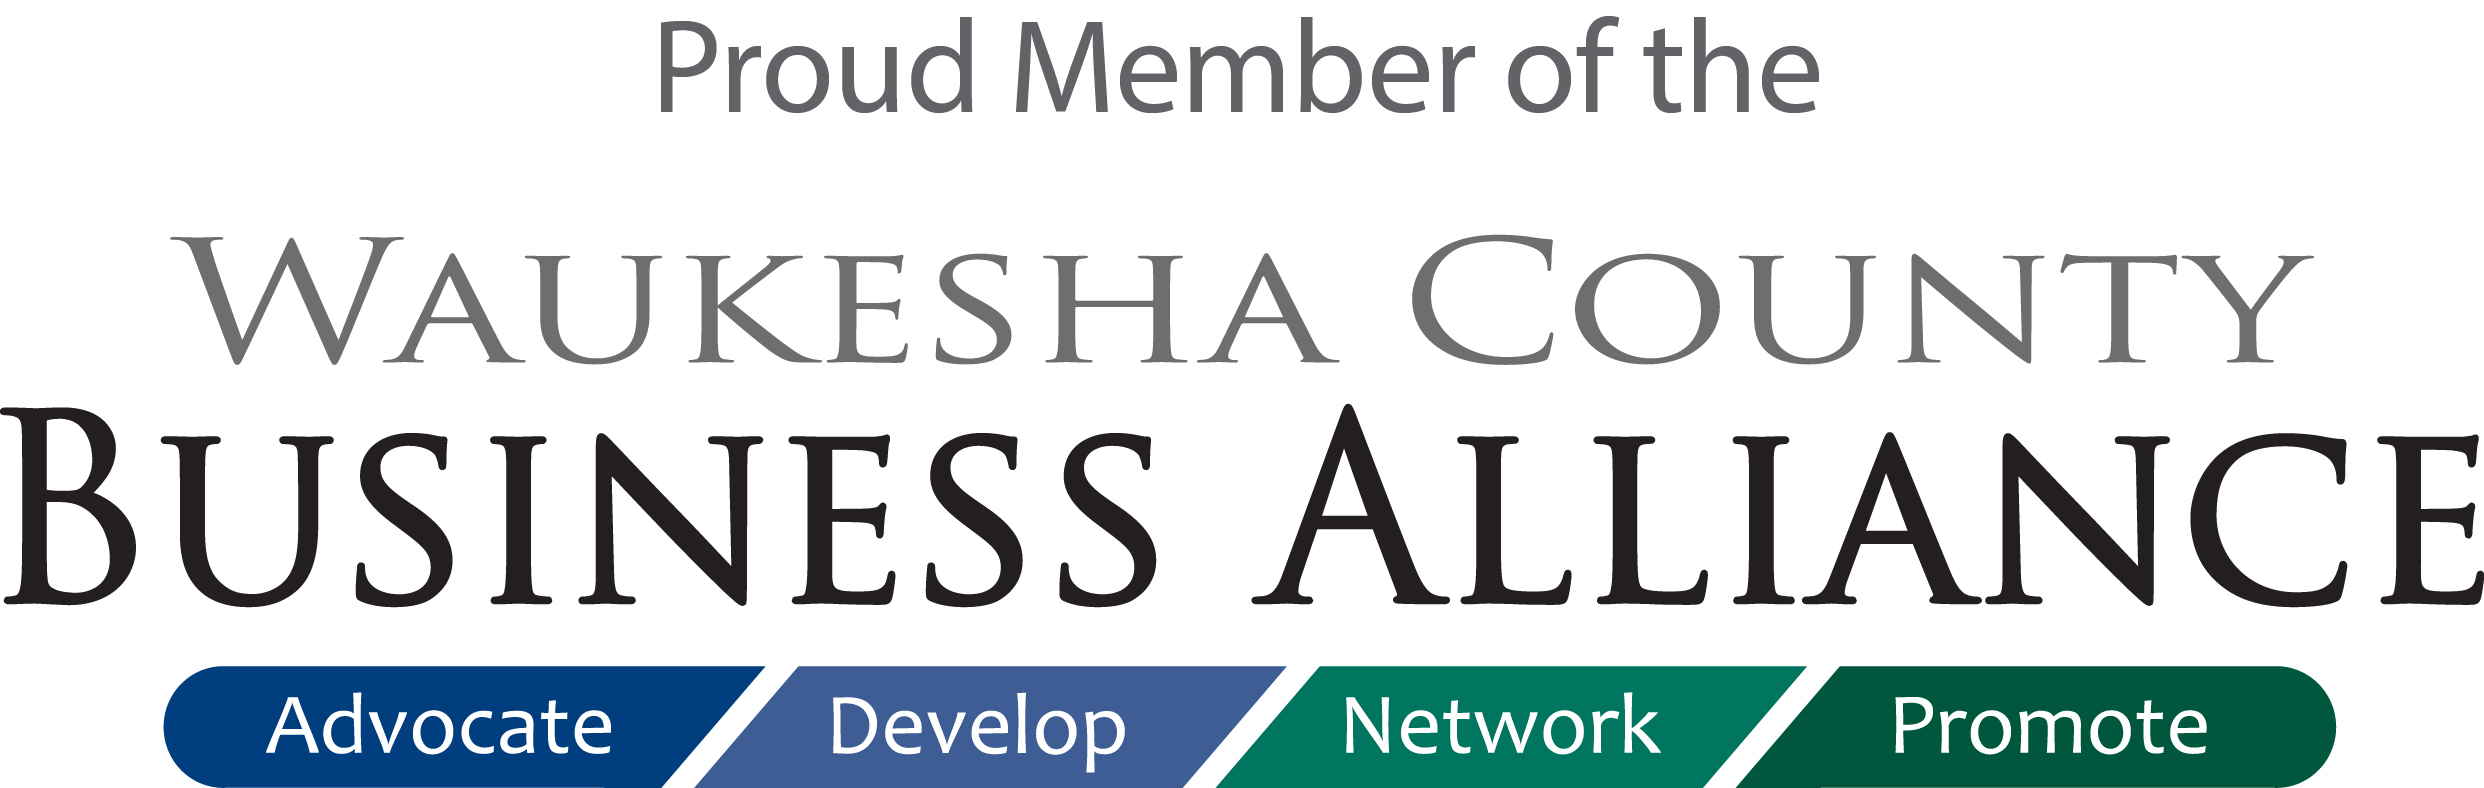 We are proud members of the Waukesha County Business Alliance